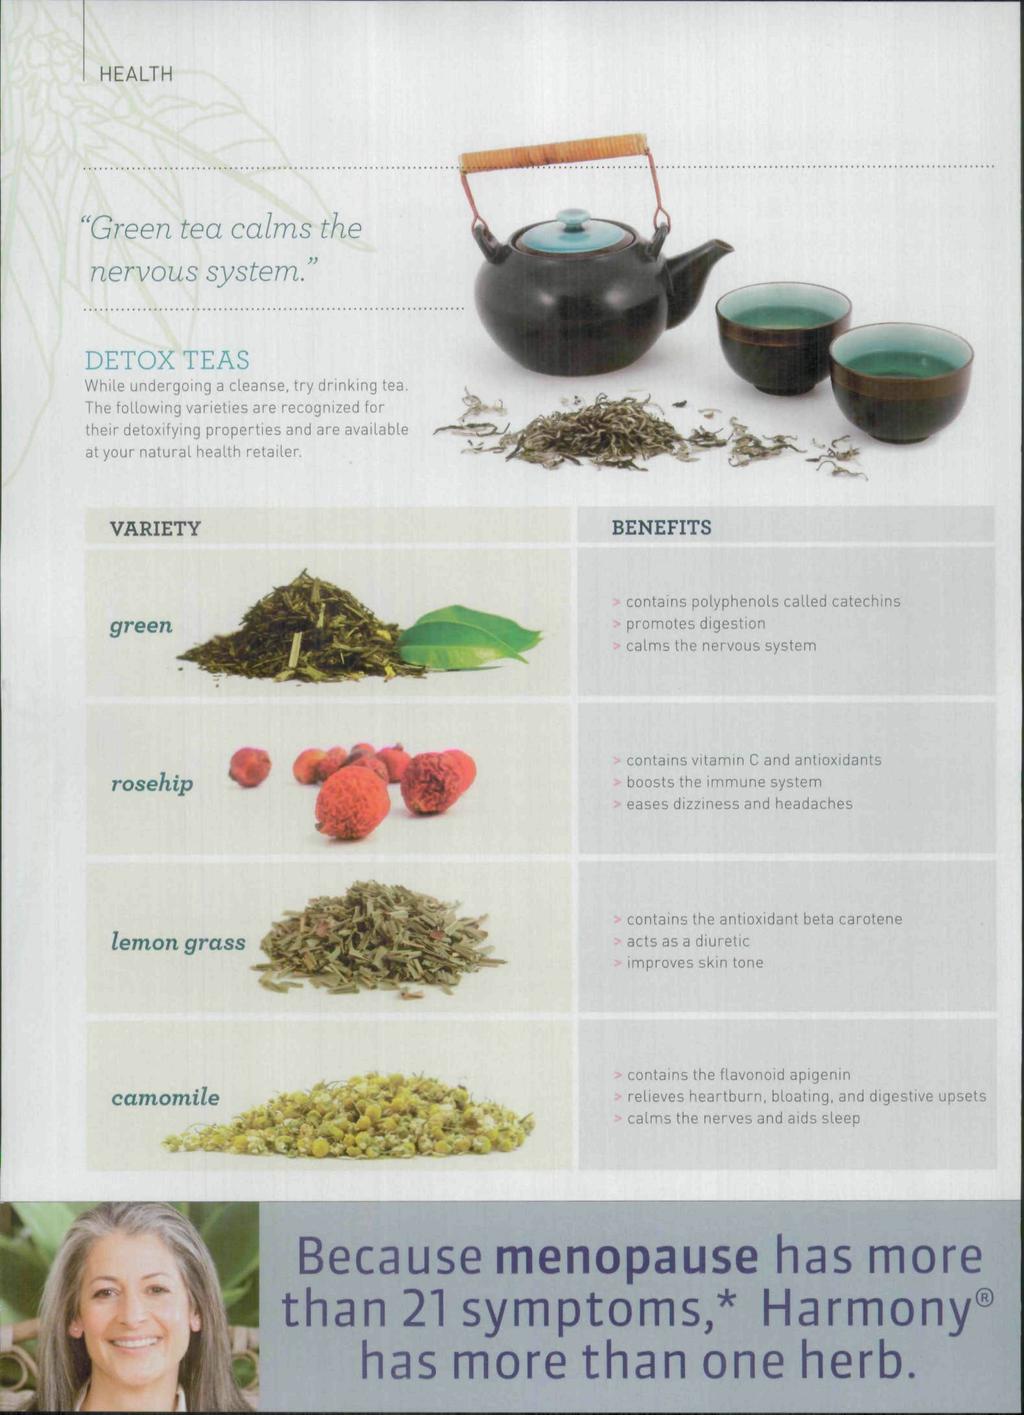 HEALTH 'Green tea calms the nervous system " DETOX TEAS While undergoing a cleanse, try drinking tea.